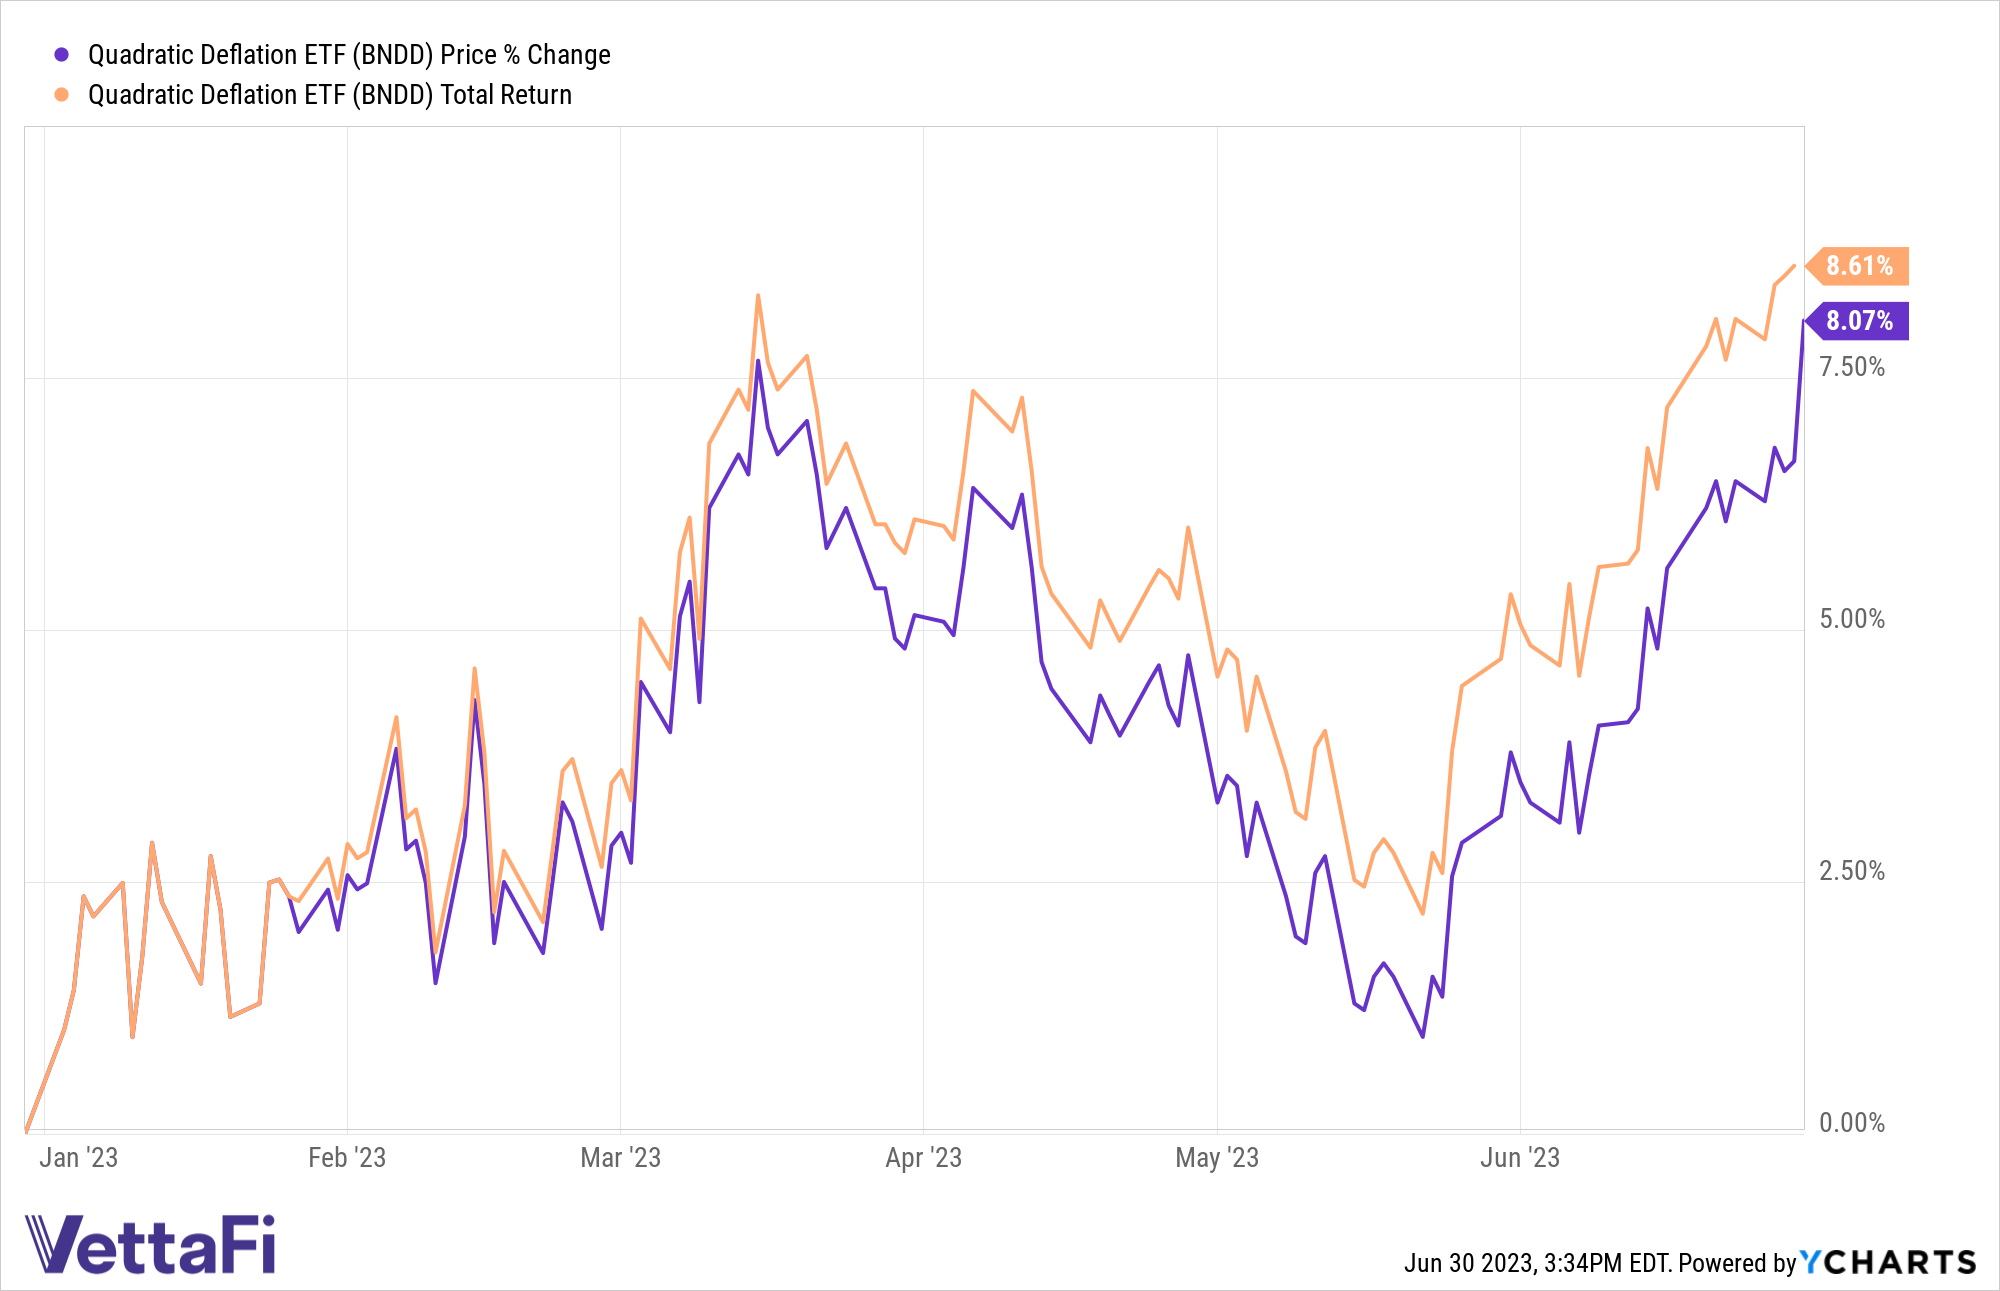 Graph of BNDD price performance YTD, up 8.07% as of June 30, and total returns up 8.61% as of June 29.